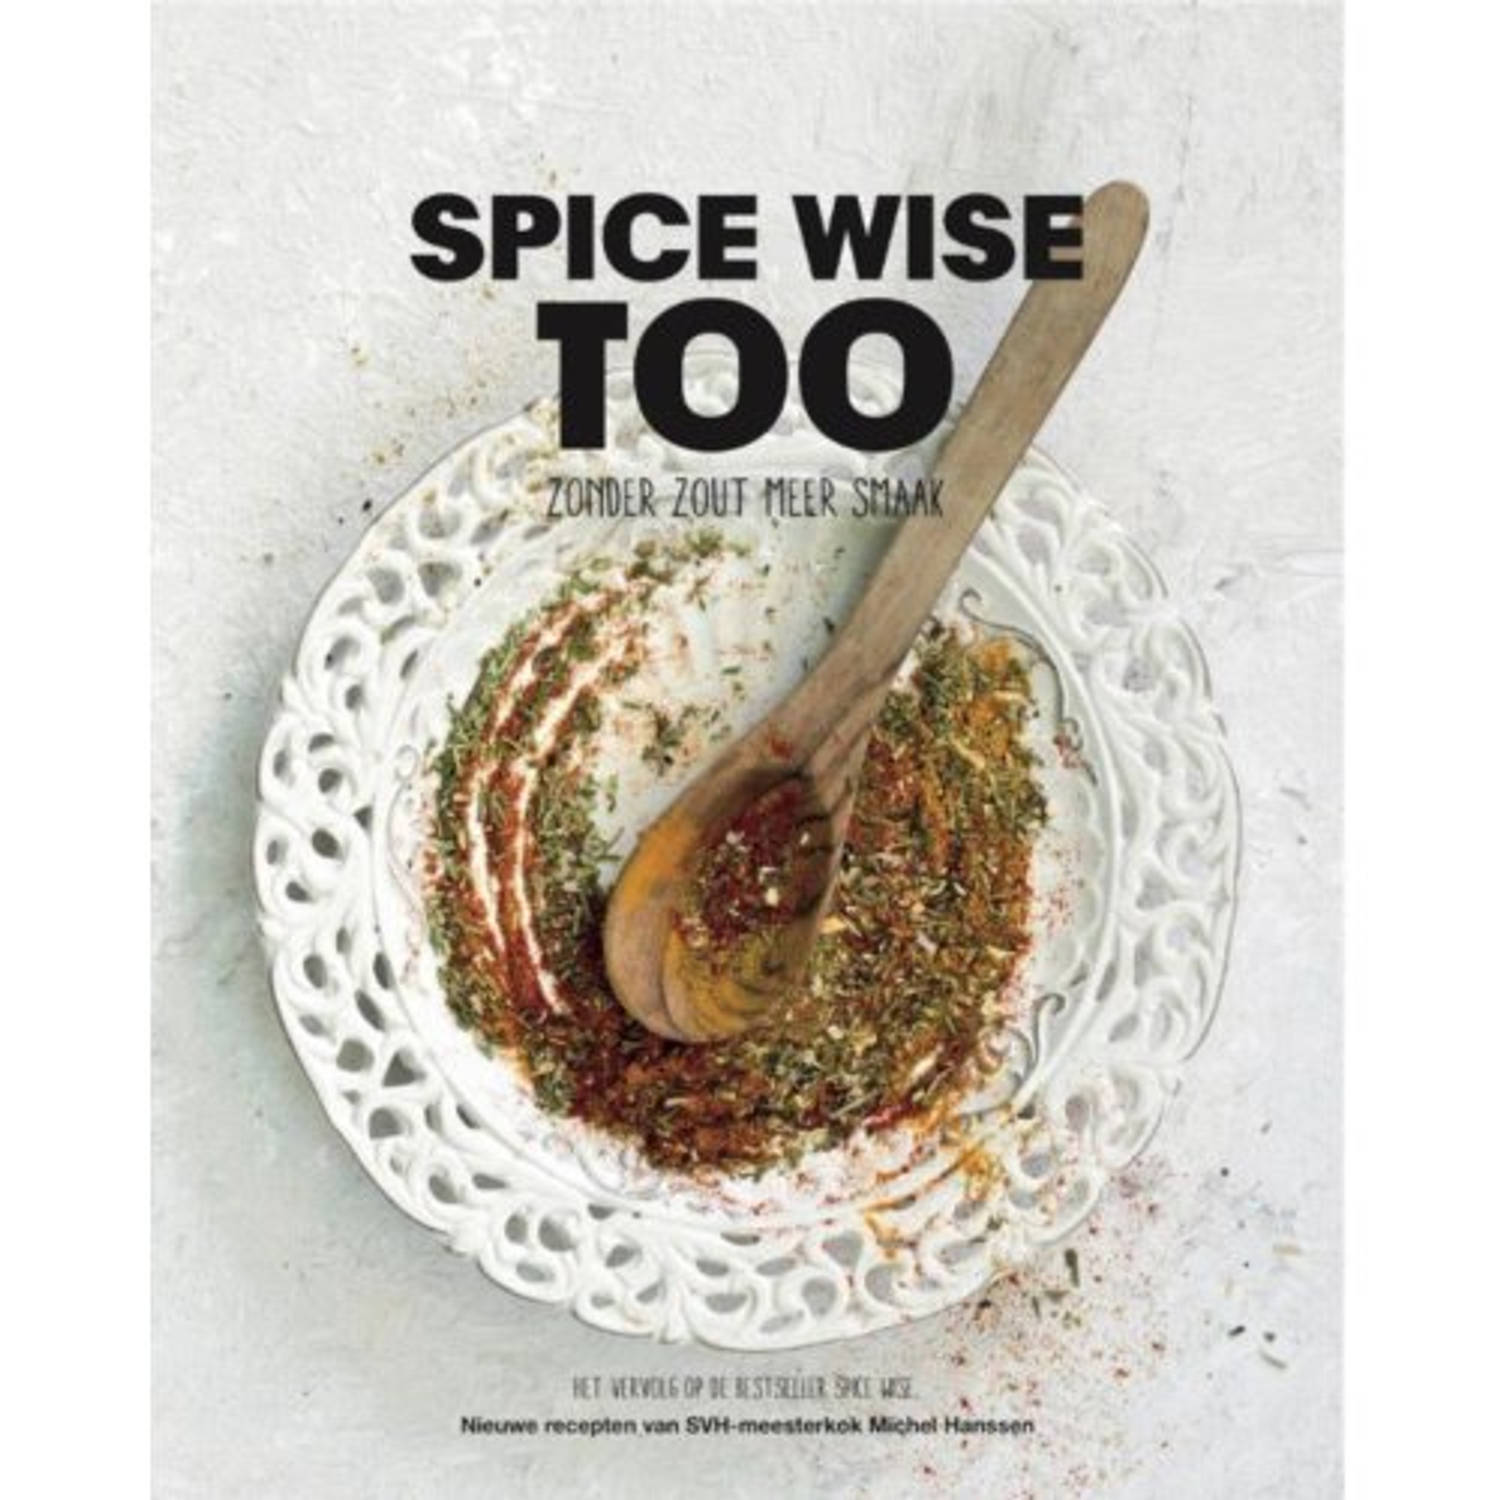 Spice Wise Too